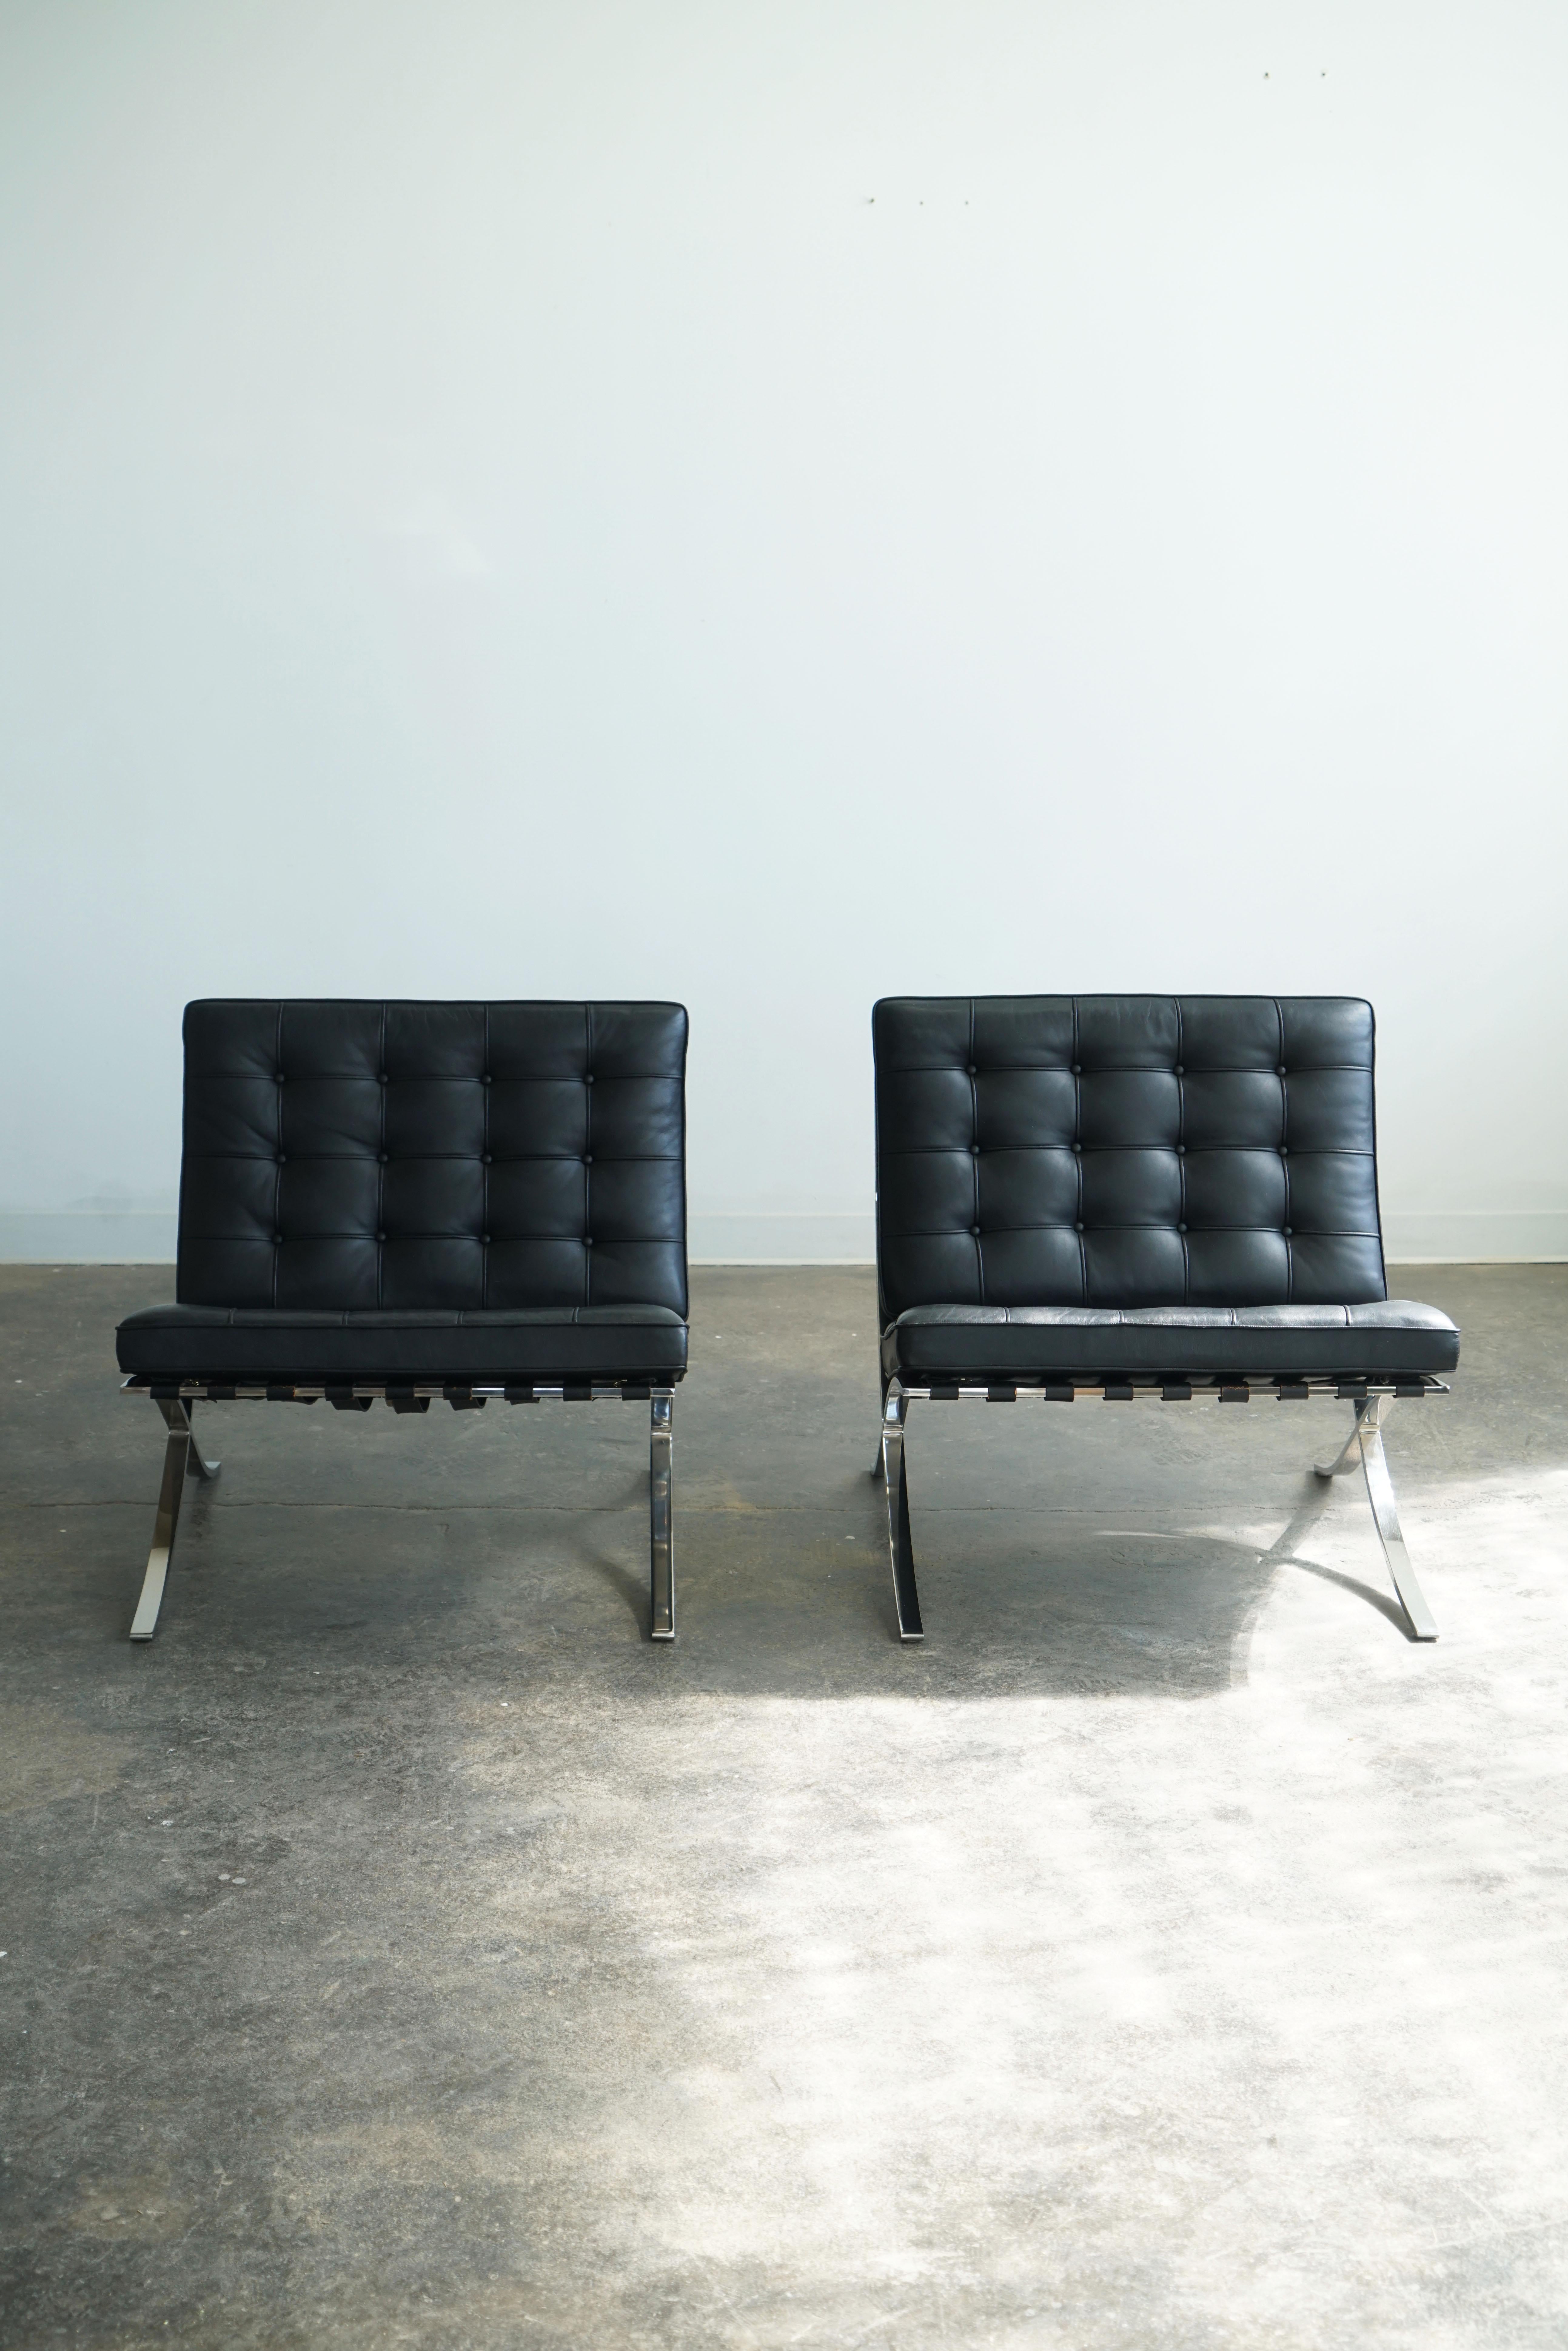 Knoll Barcelona Chairs, set of 2.
Designed by Mies van der Rohe, originally in 1929.  
Black leather.

Knoll manufacturer tags are dated 1987 on bottom of seat cushions.

One of the most recognized chairs of the last century, and an icon of the